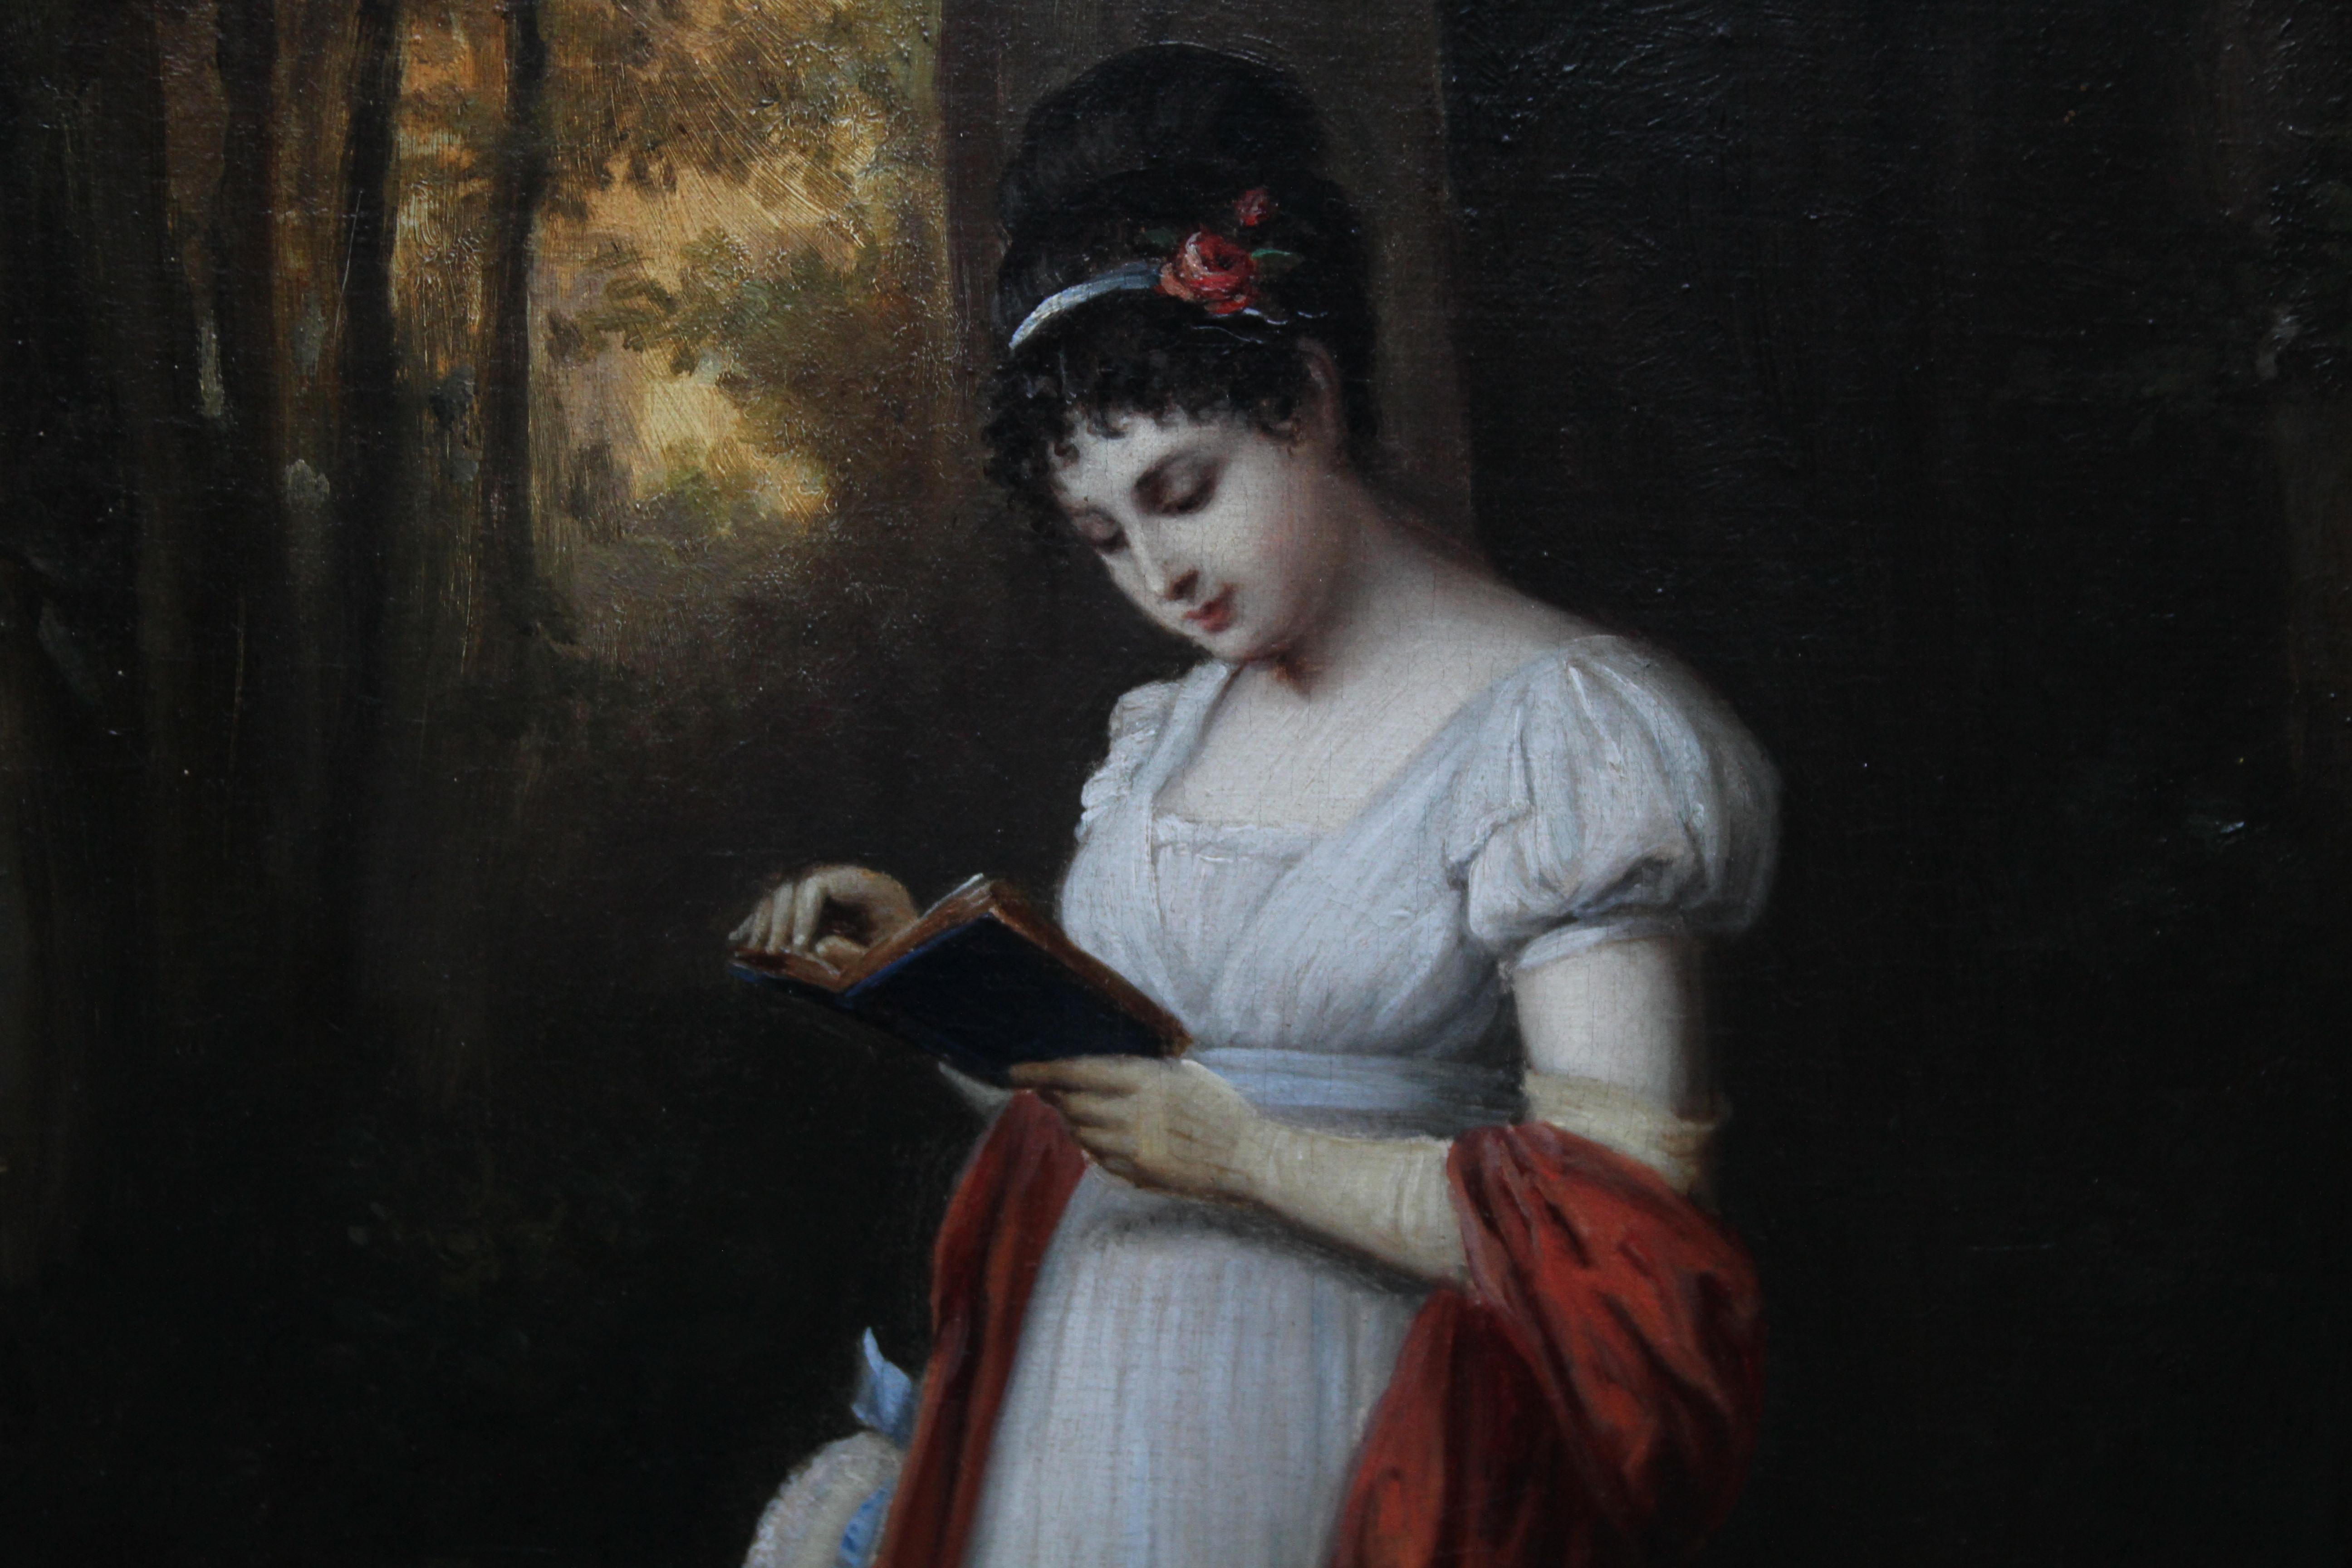 This charming early 19th century oil painting is from the French School. It is signed with a monogram in red lower right. Painted in a realistic but romantic manner with detailed brushwork, the young woman is illuminated as if in a ray of light. The